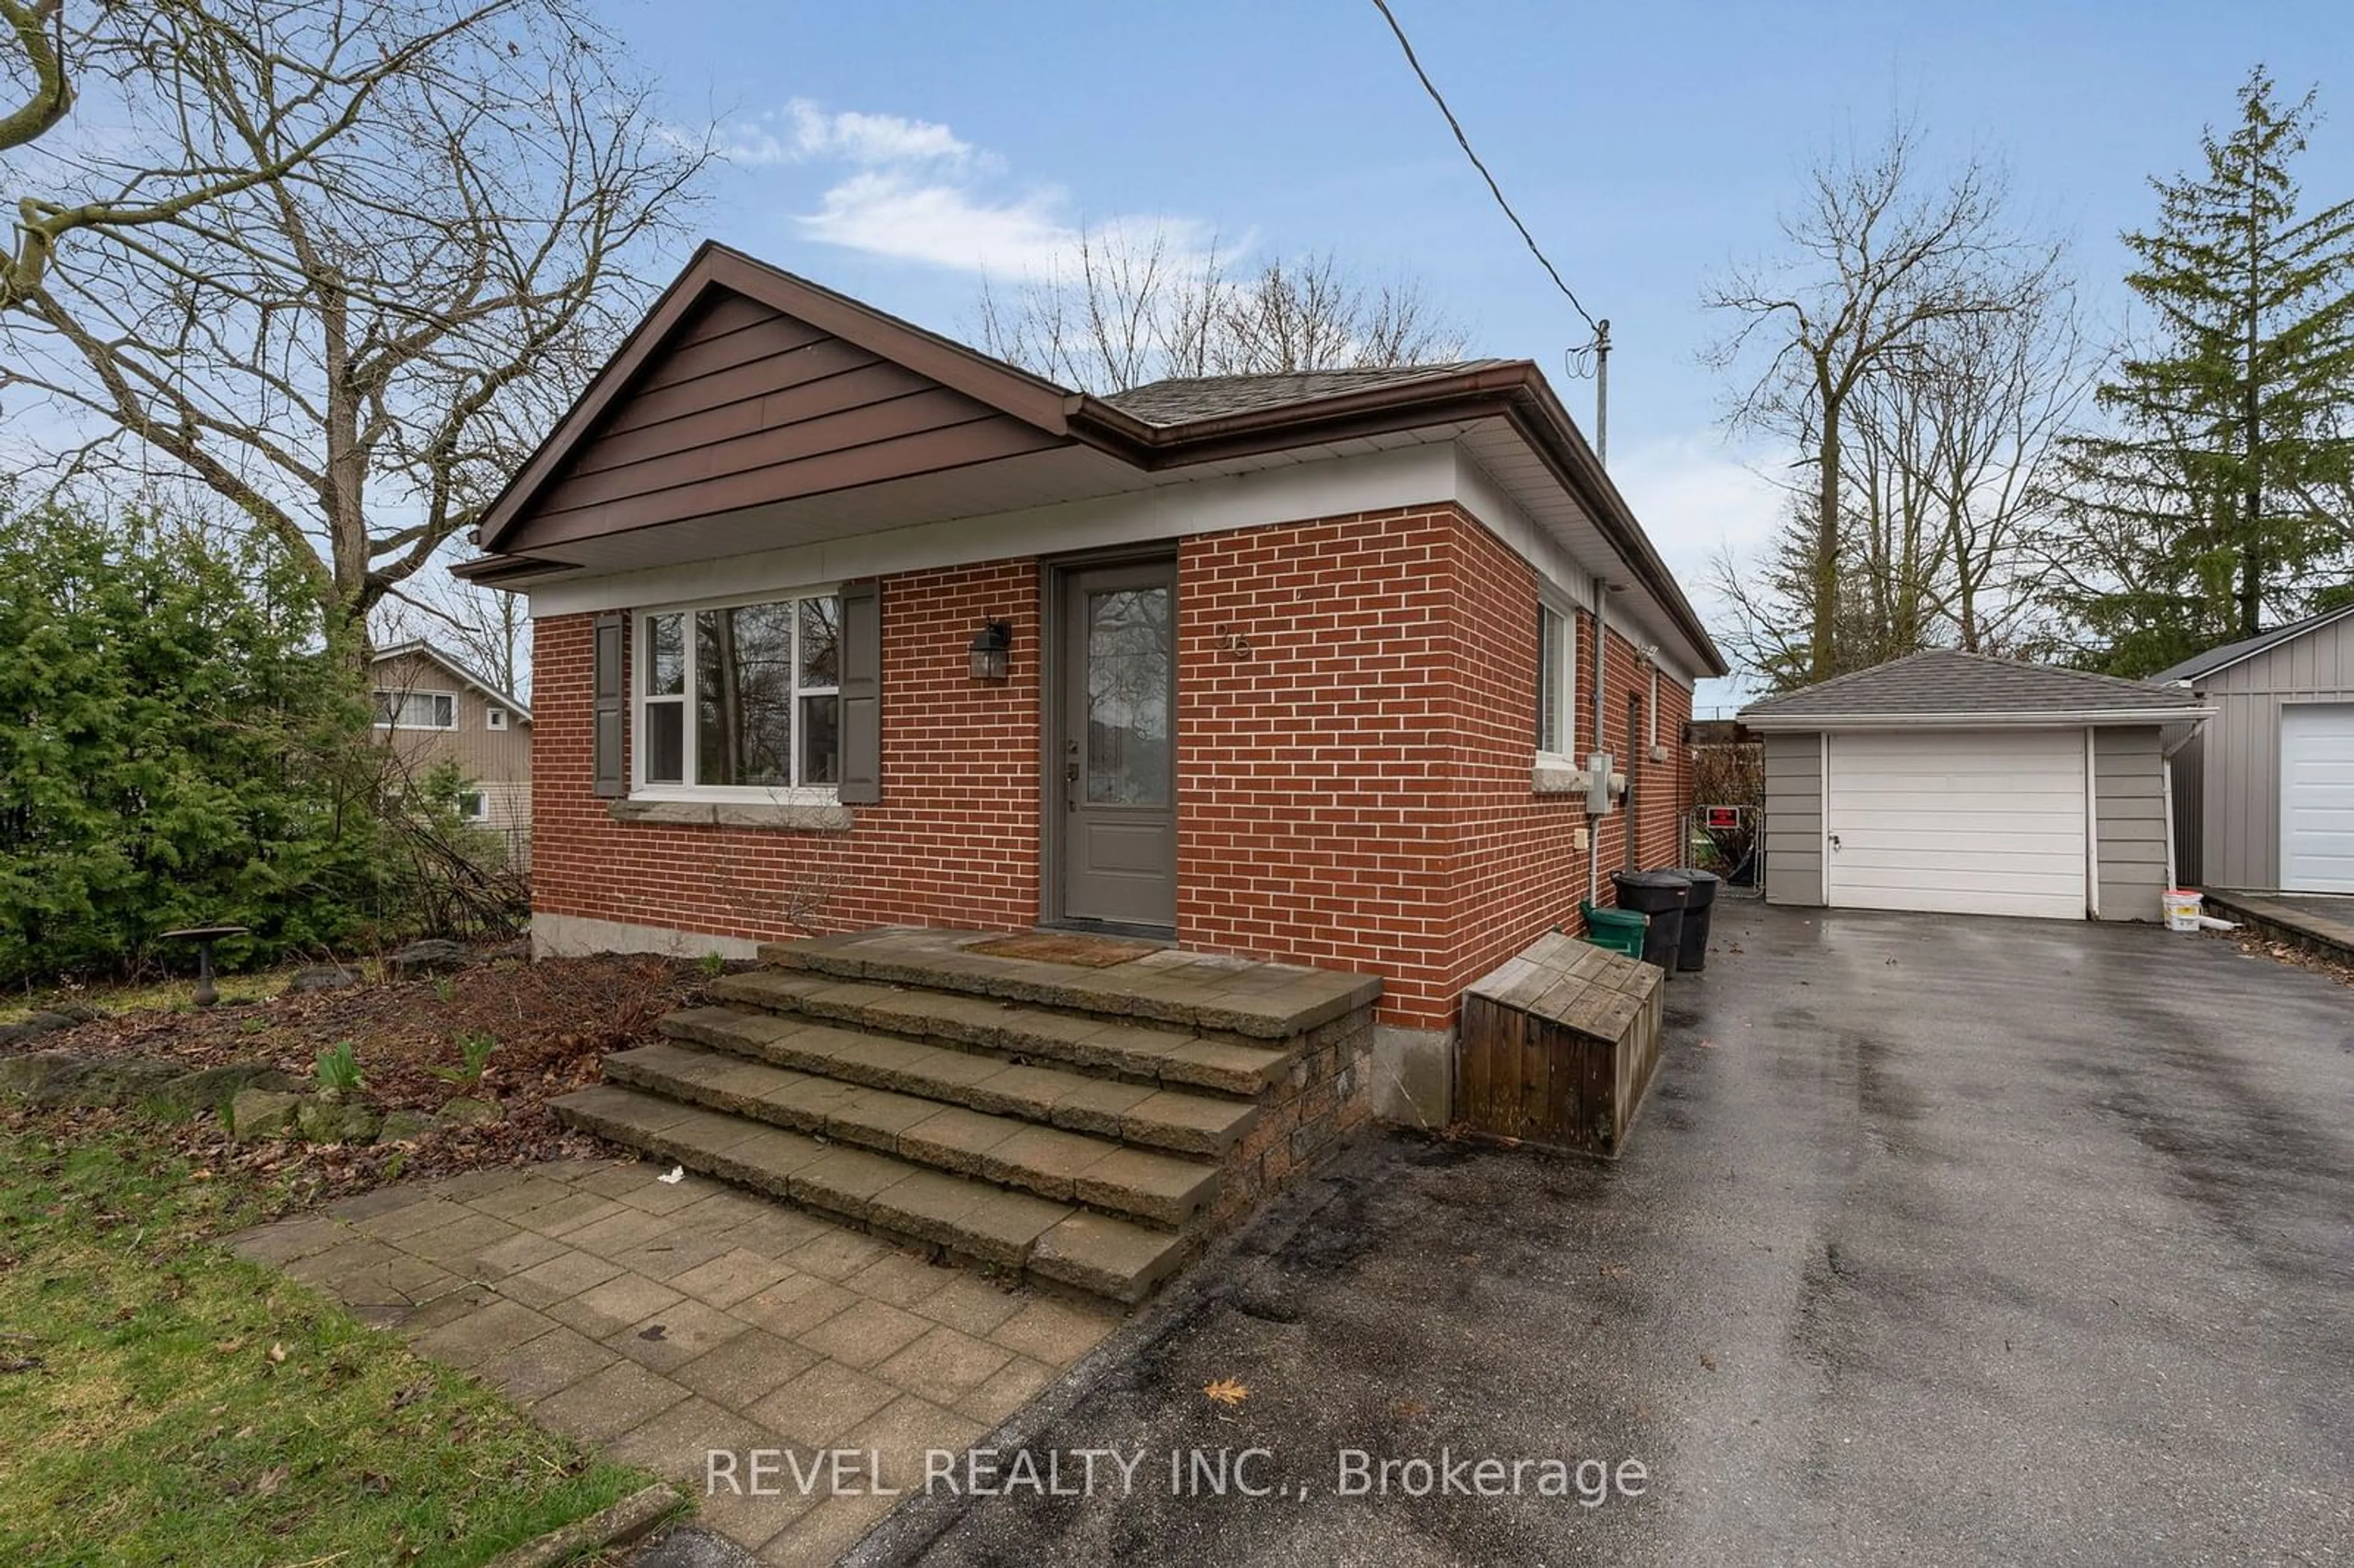 Home with brick exterior material for 36 Lount St, Barrie Ontario L4M 3E1